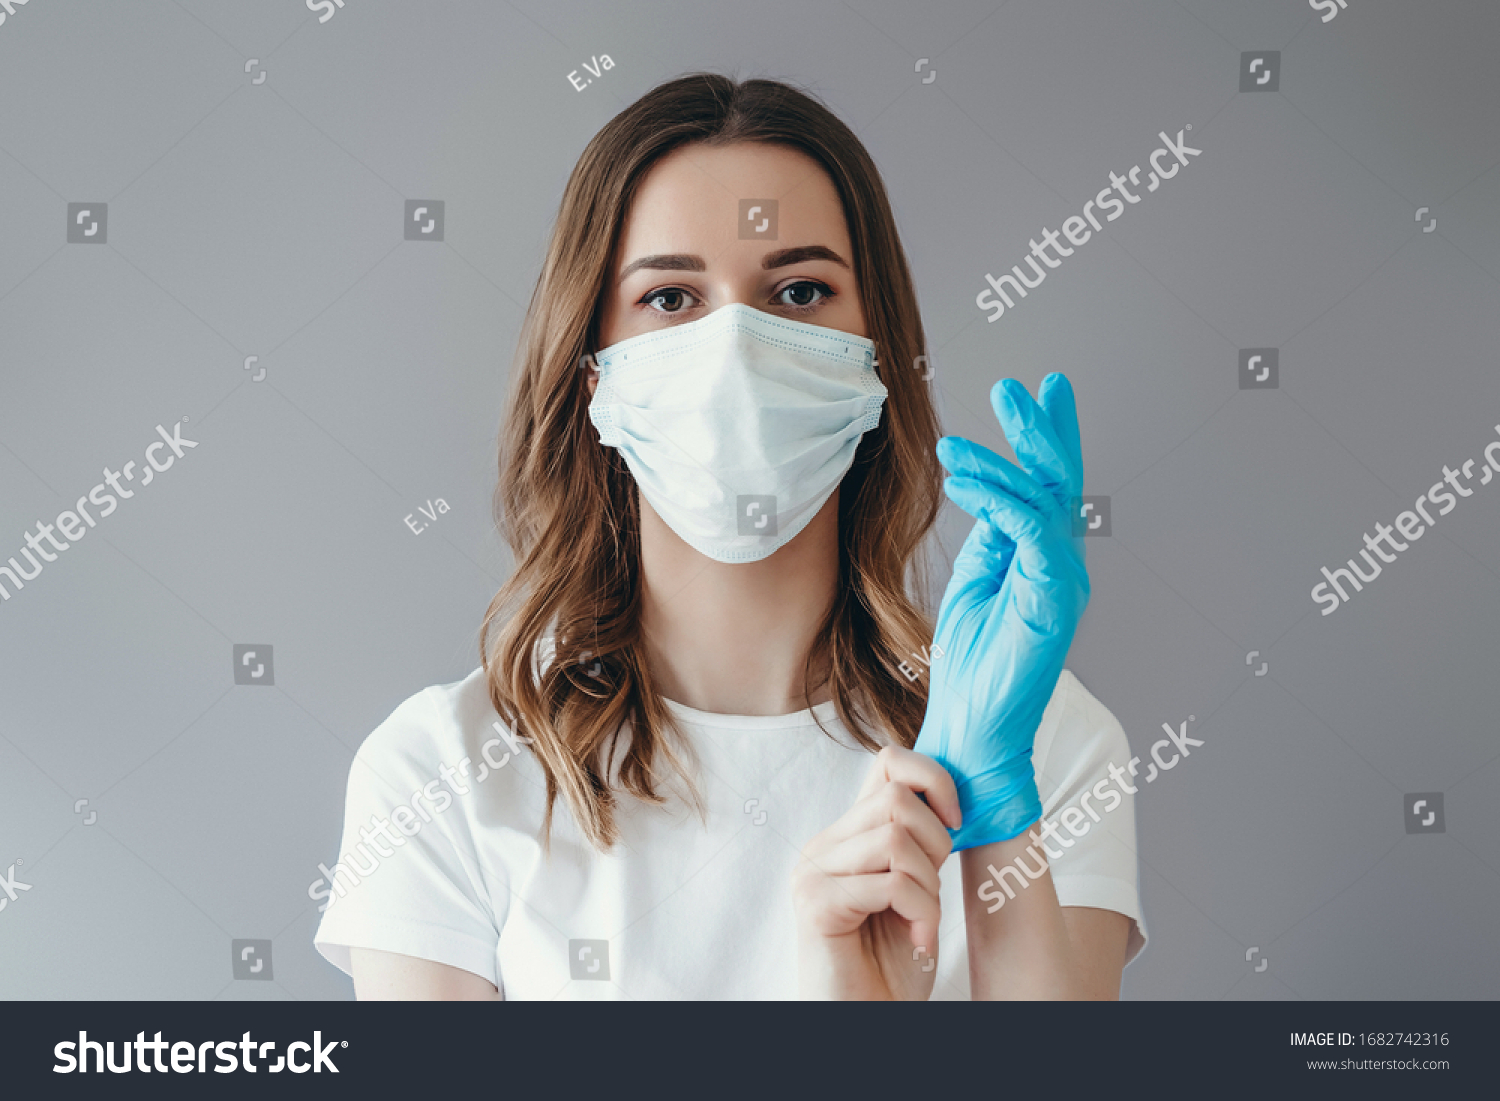 Young woman patient in a medical mask puts on protective surgical sterile gloves on her arm, isolated on gray background, protection against coronovirus #1682742316